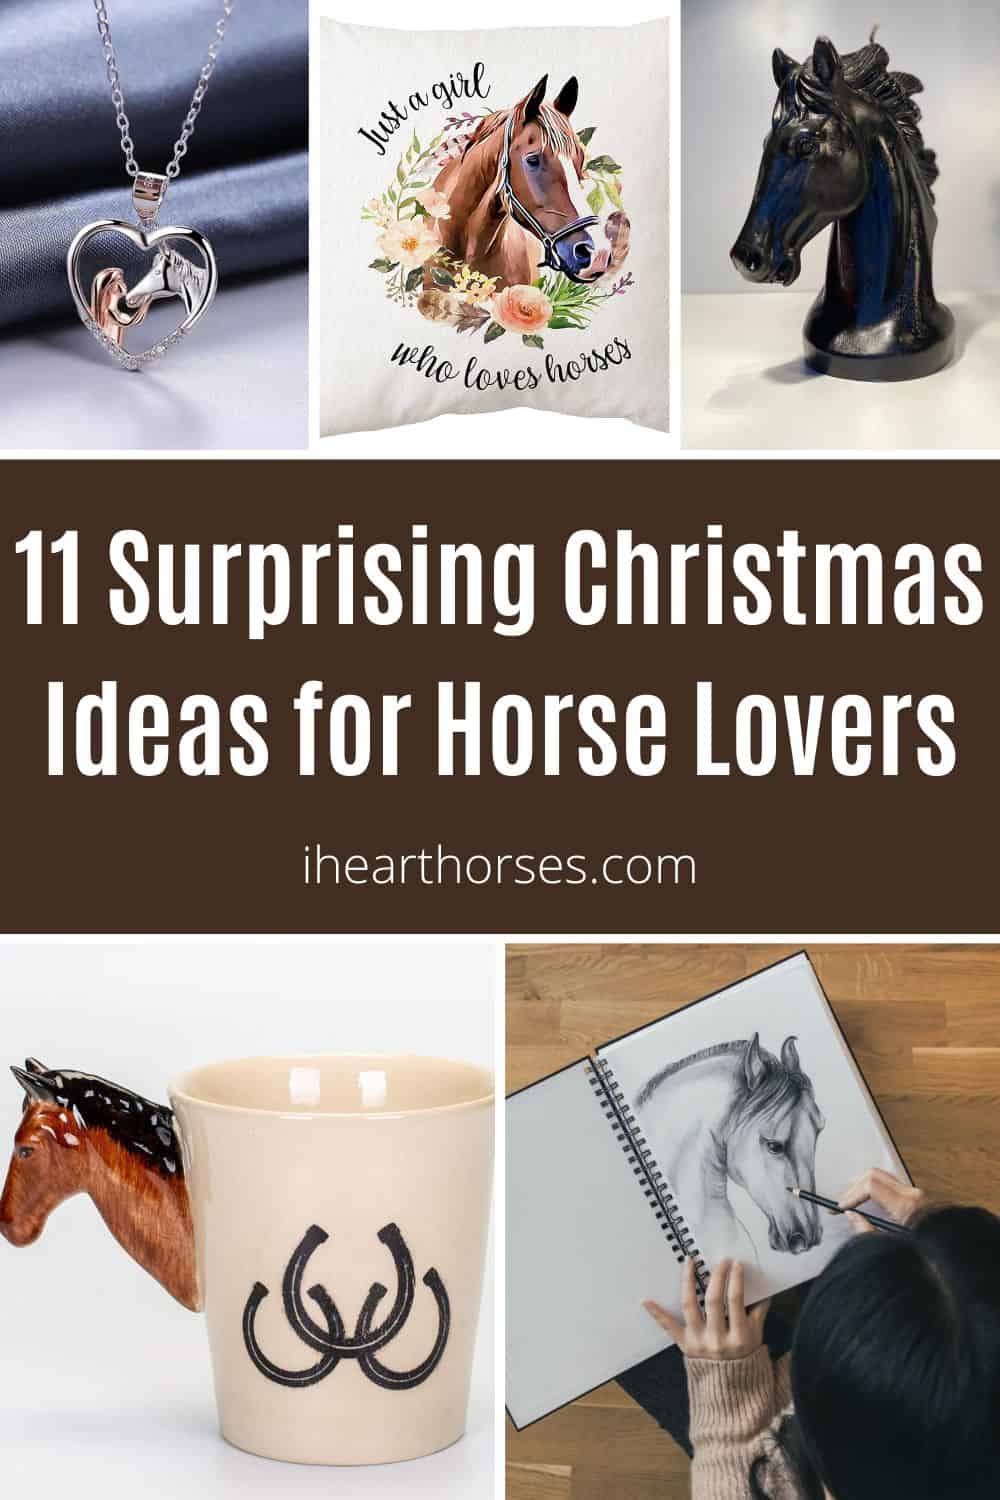 11 Surprising Christmas Ideas for Horse Lovers